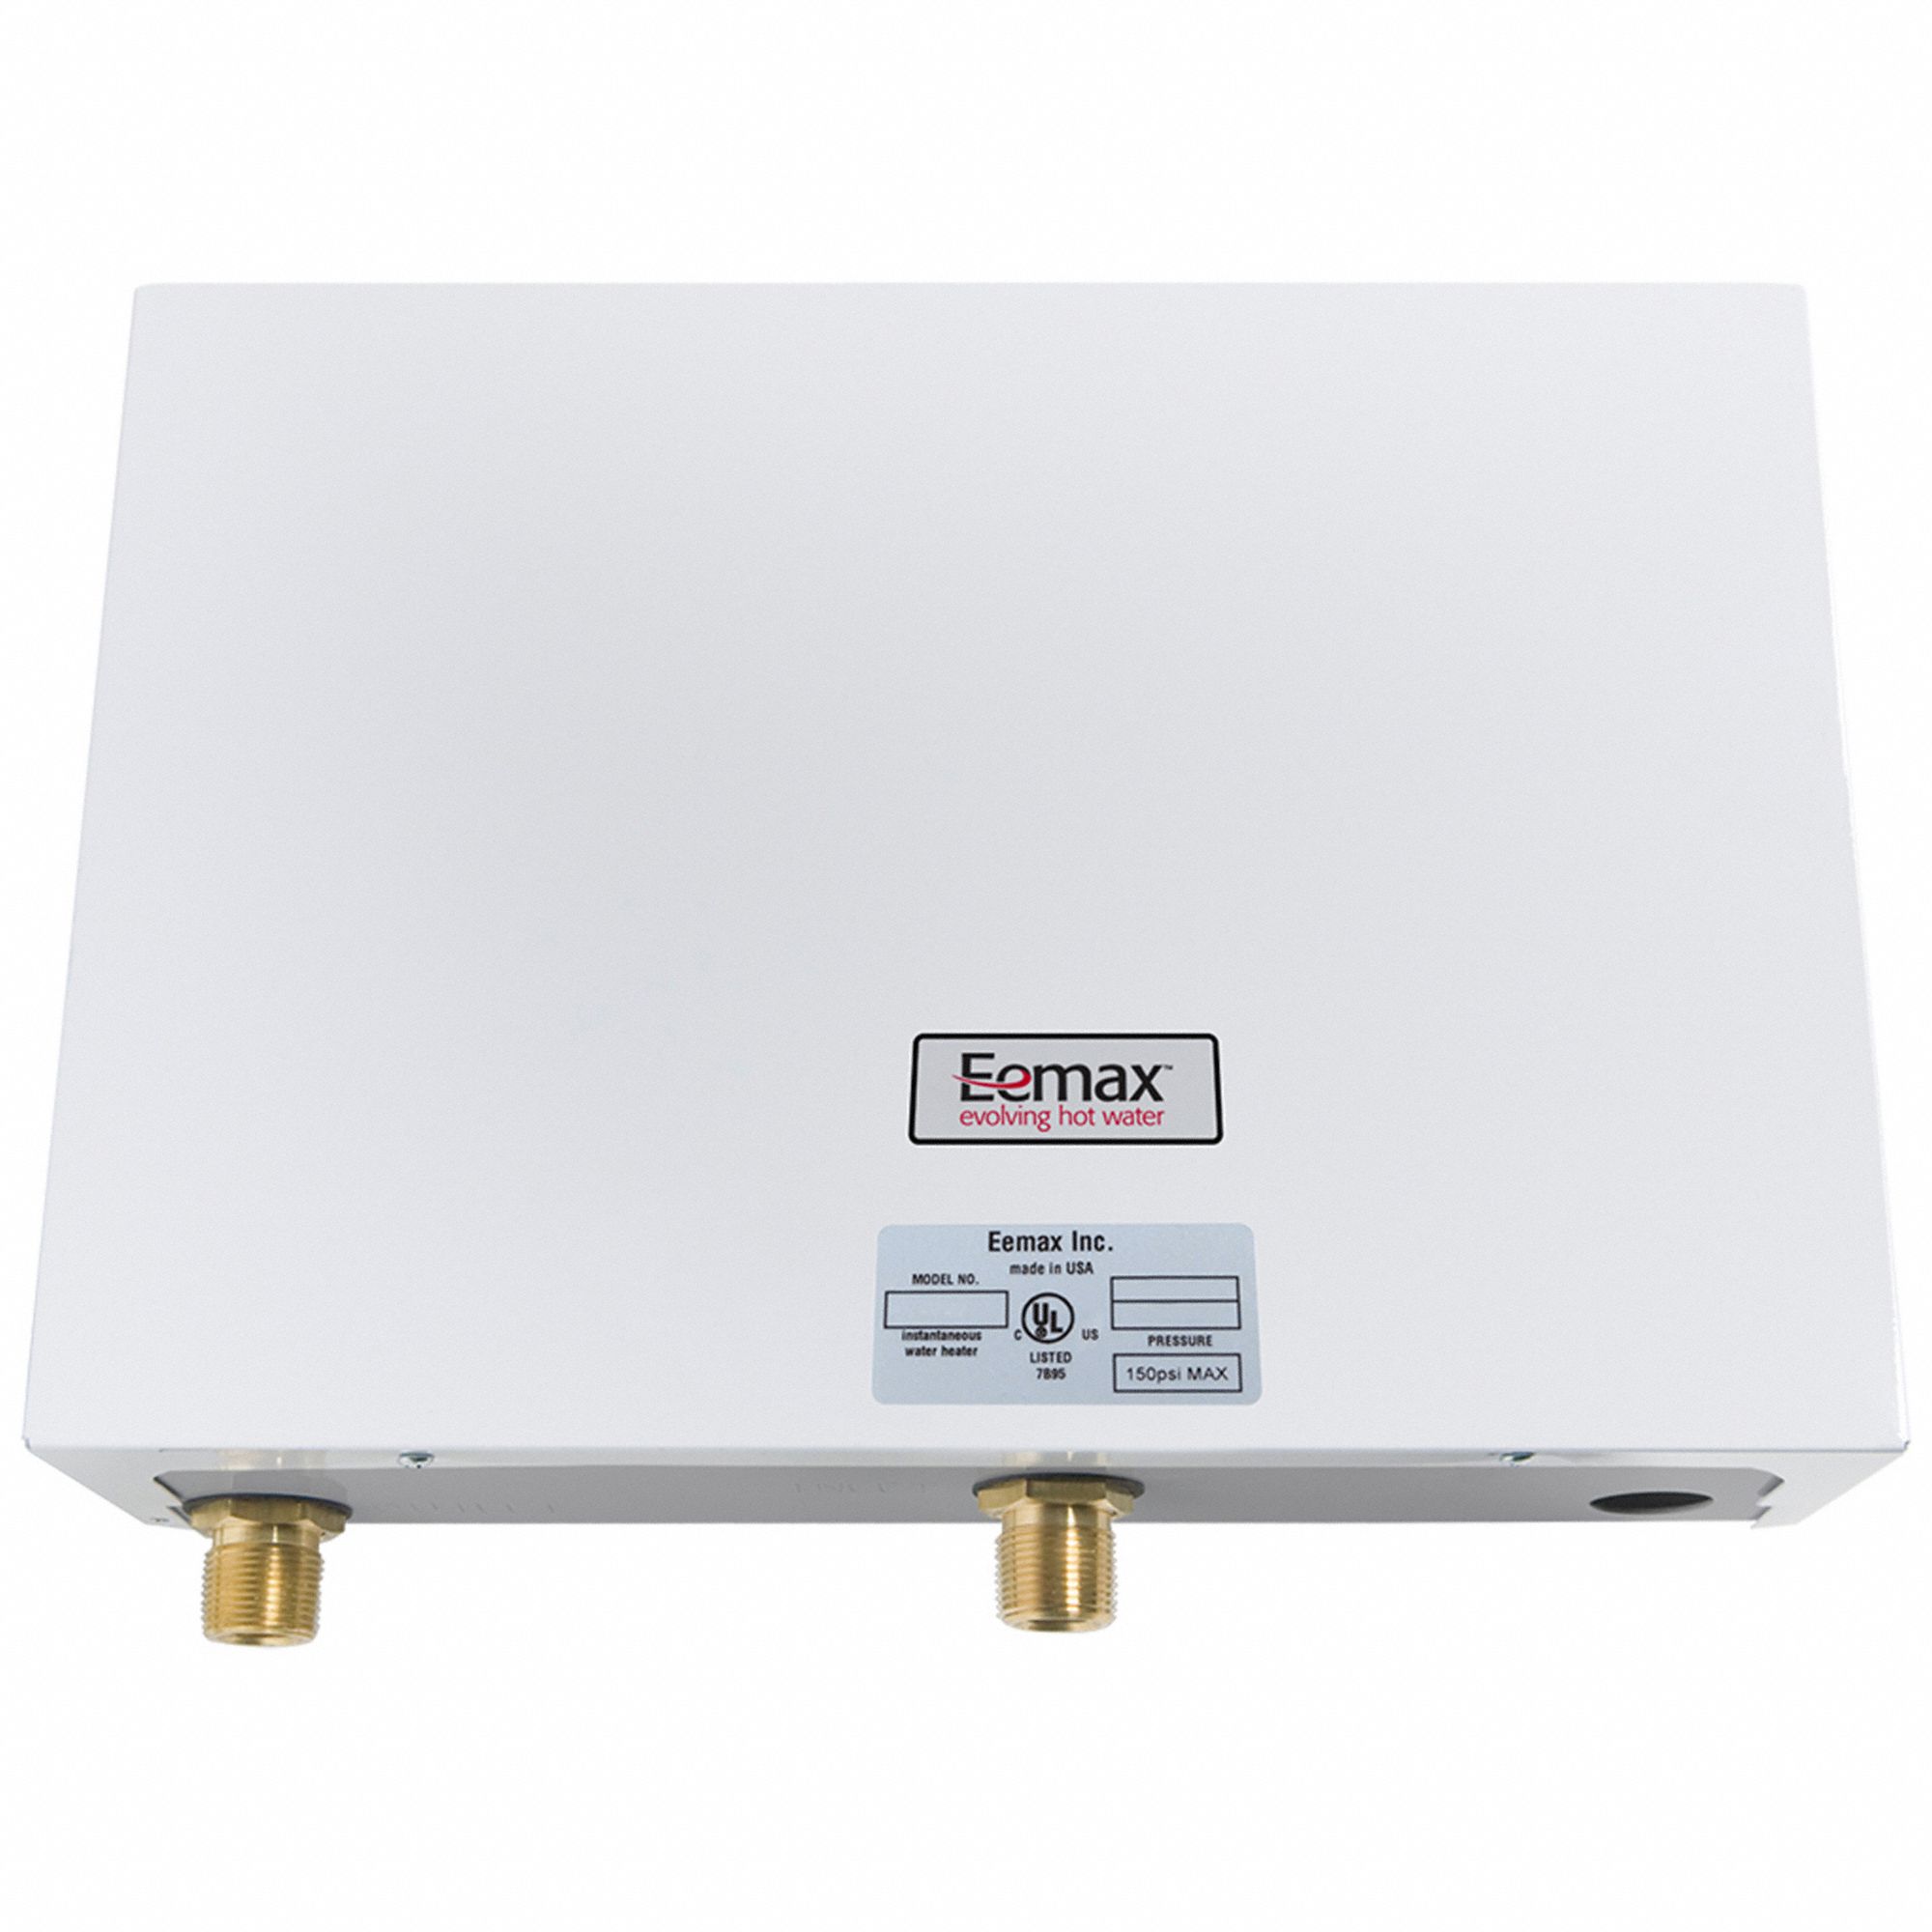 EEMAX EX240T2T Electric Tankless Water Heater208V